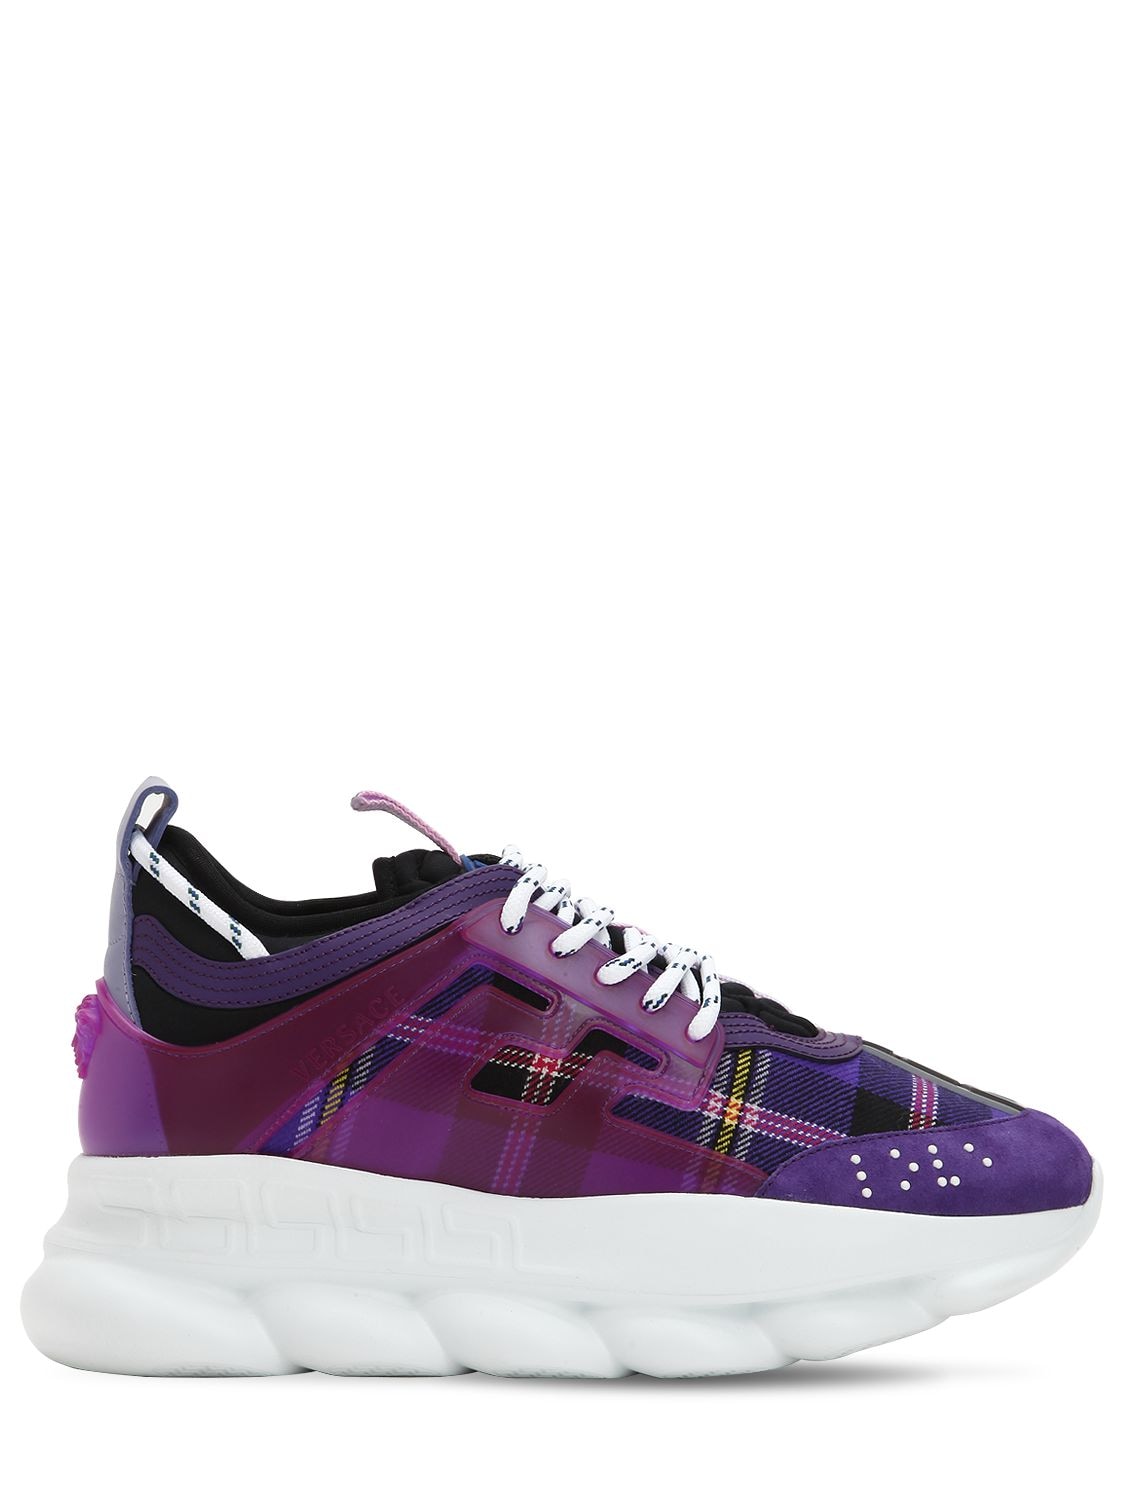 VERSACE CHAIN REACTION WOOL PLAID SNEAKERS,68IM7E005-RE1DVKW1